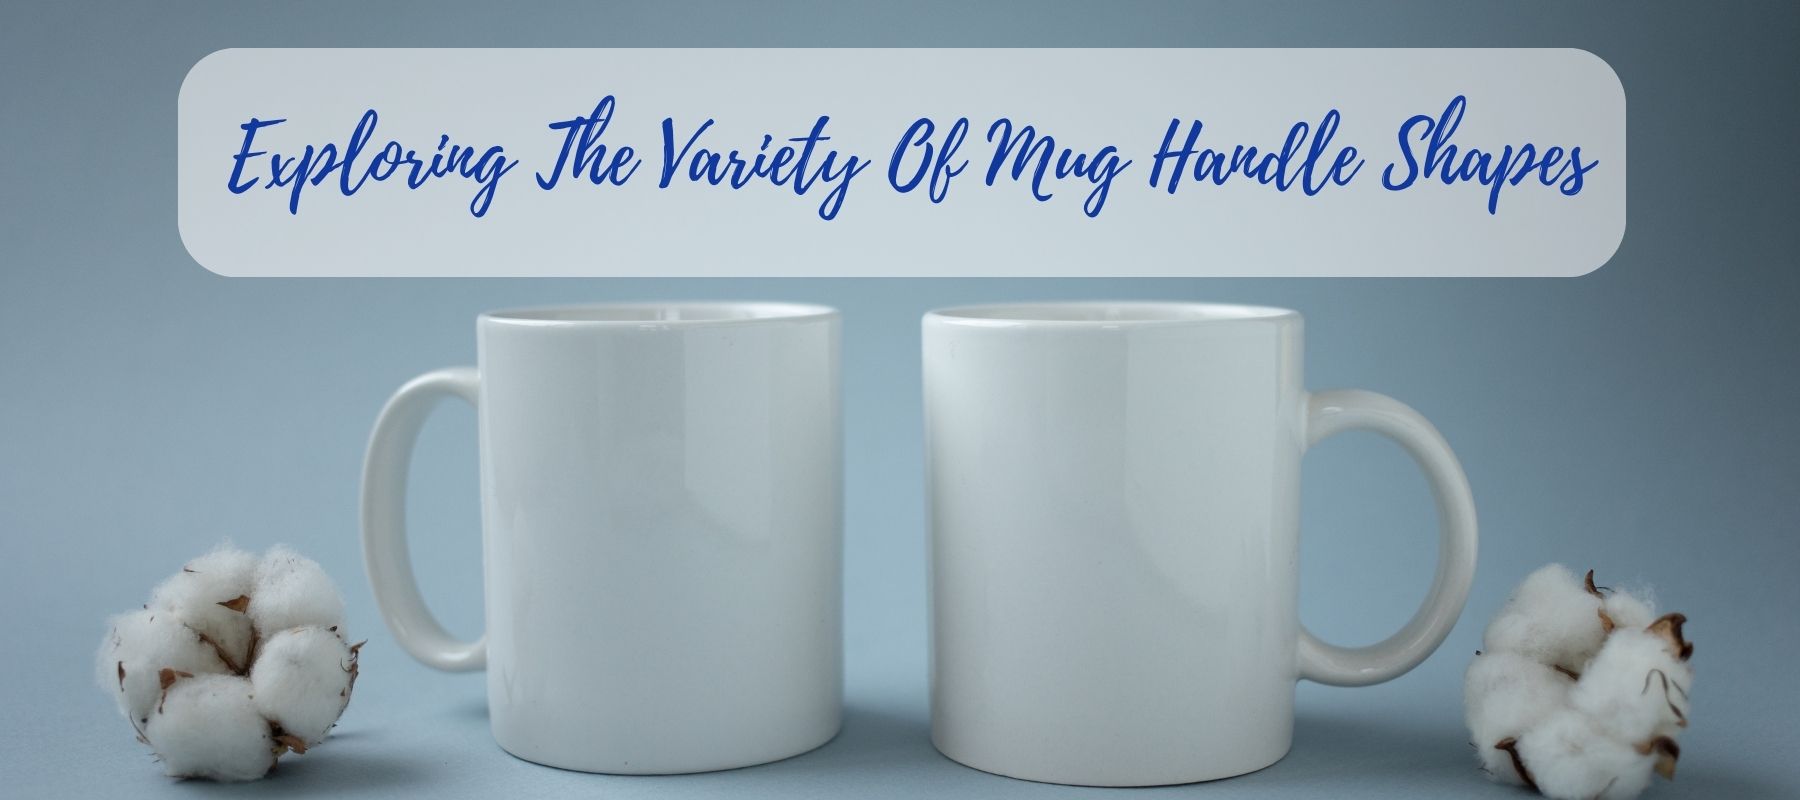 What Are Different Mug Handle Shapes & Styles?